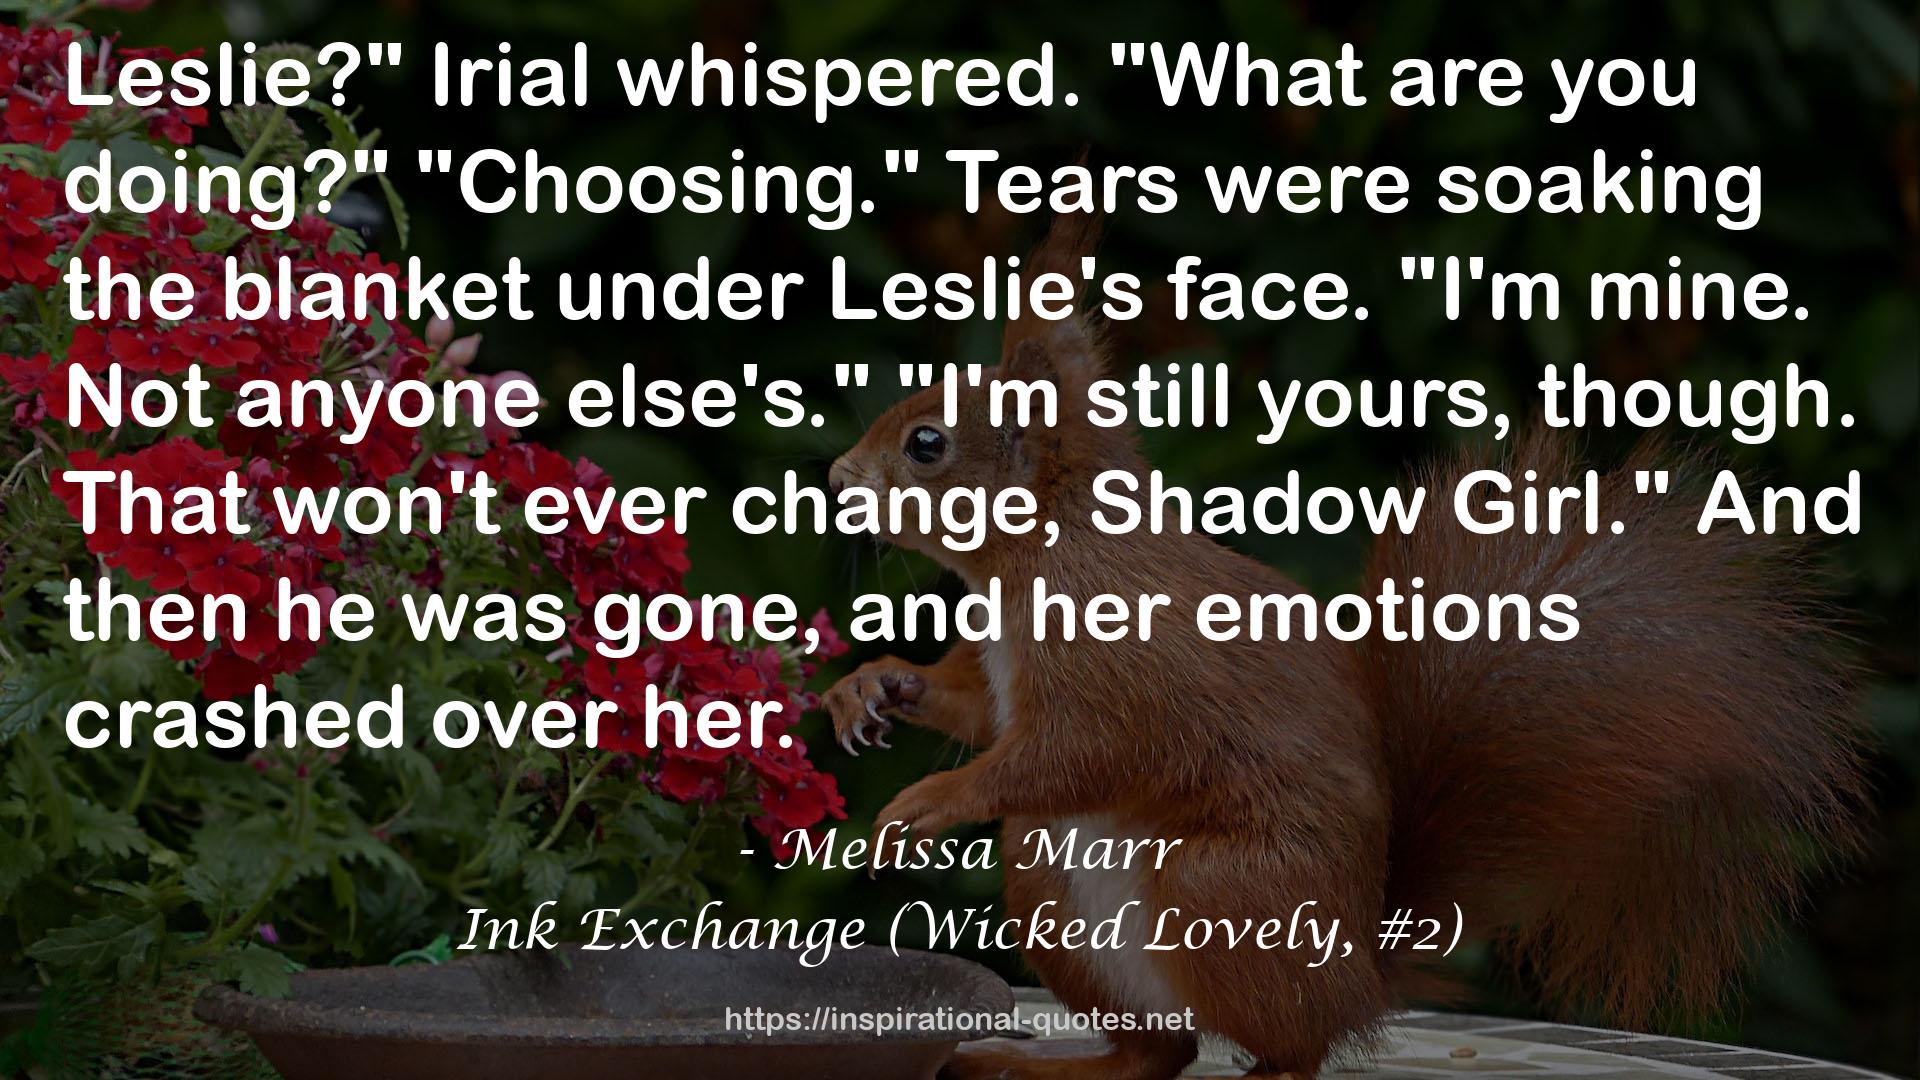 Ink Exchange (Wicked Lovely, #2) QUOTES